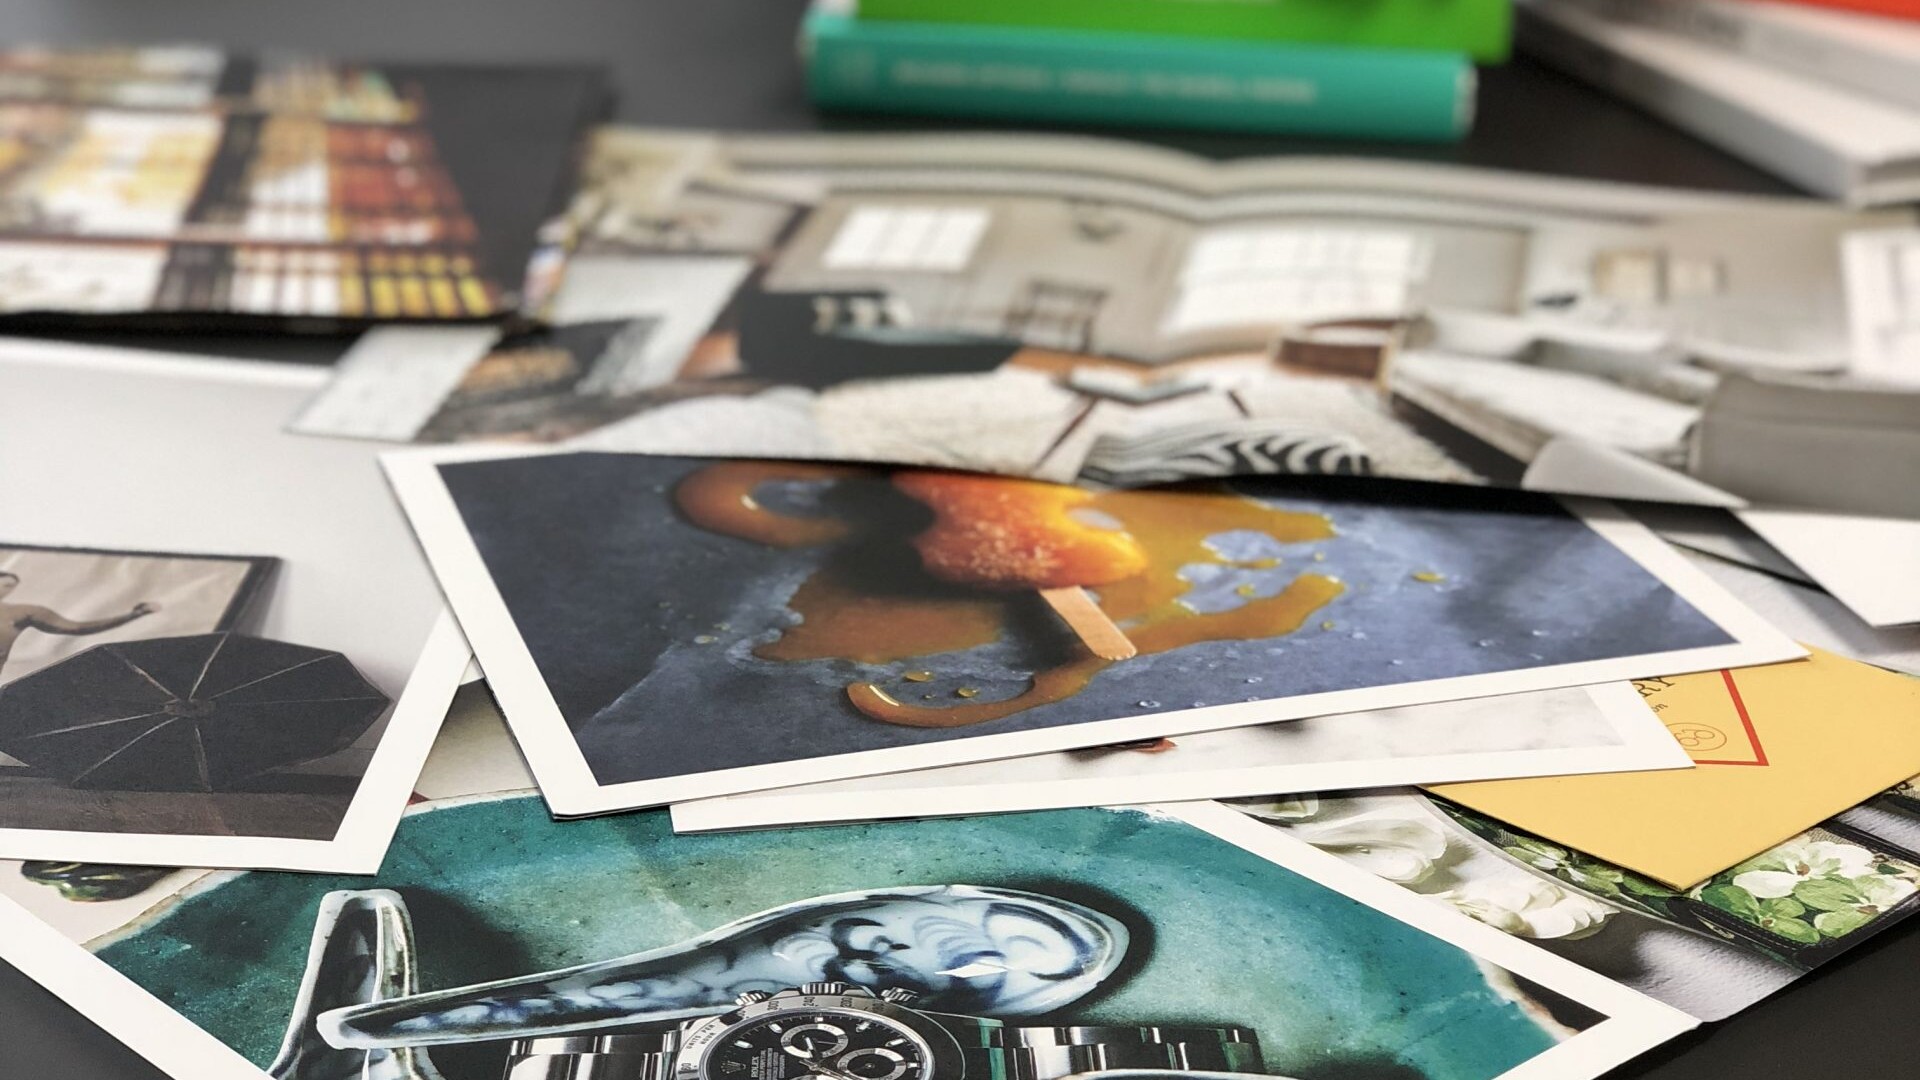 Printed photo assets sit on a desk.